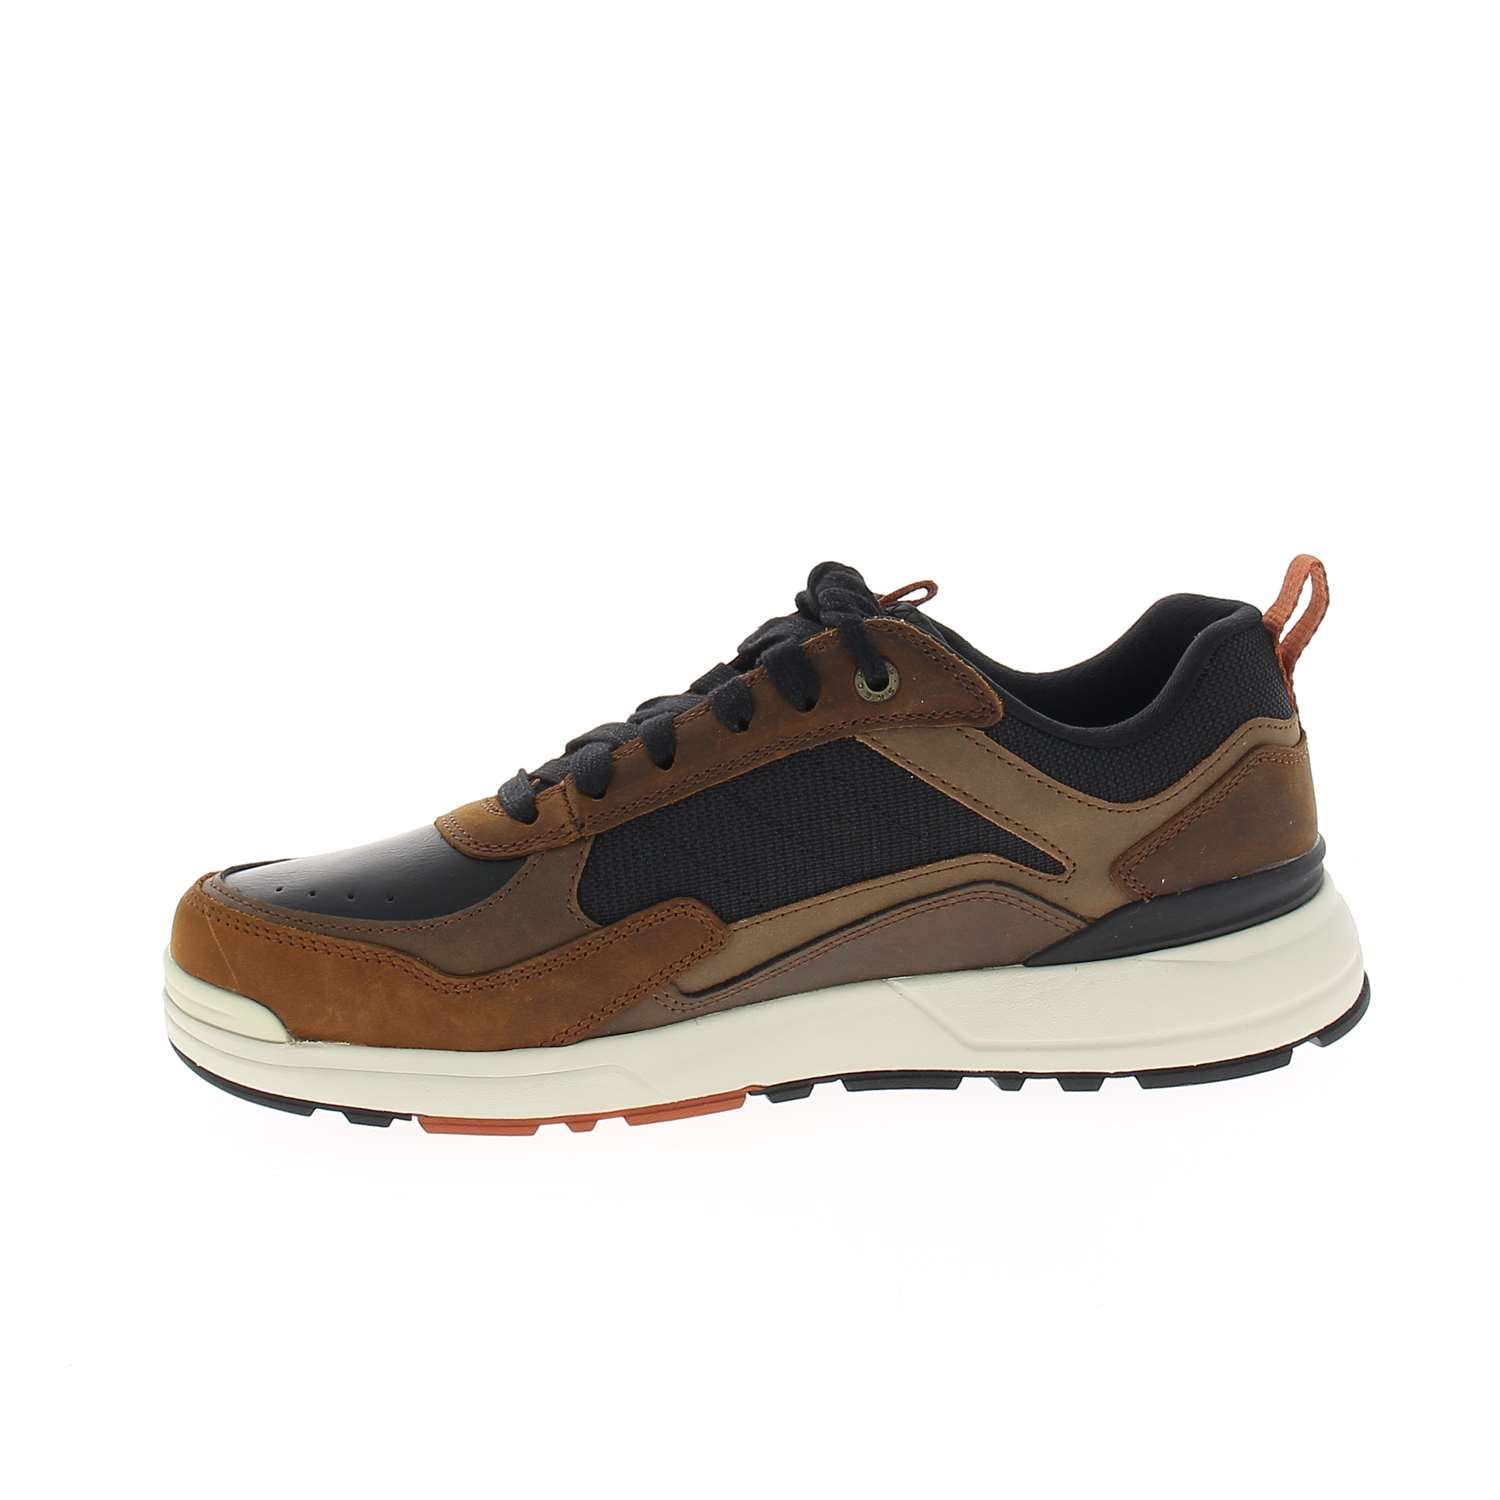 05 - ROZIER RELAXED FIT - SKECHERS - Chaussures à lacets - Nubuck